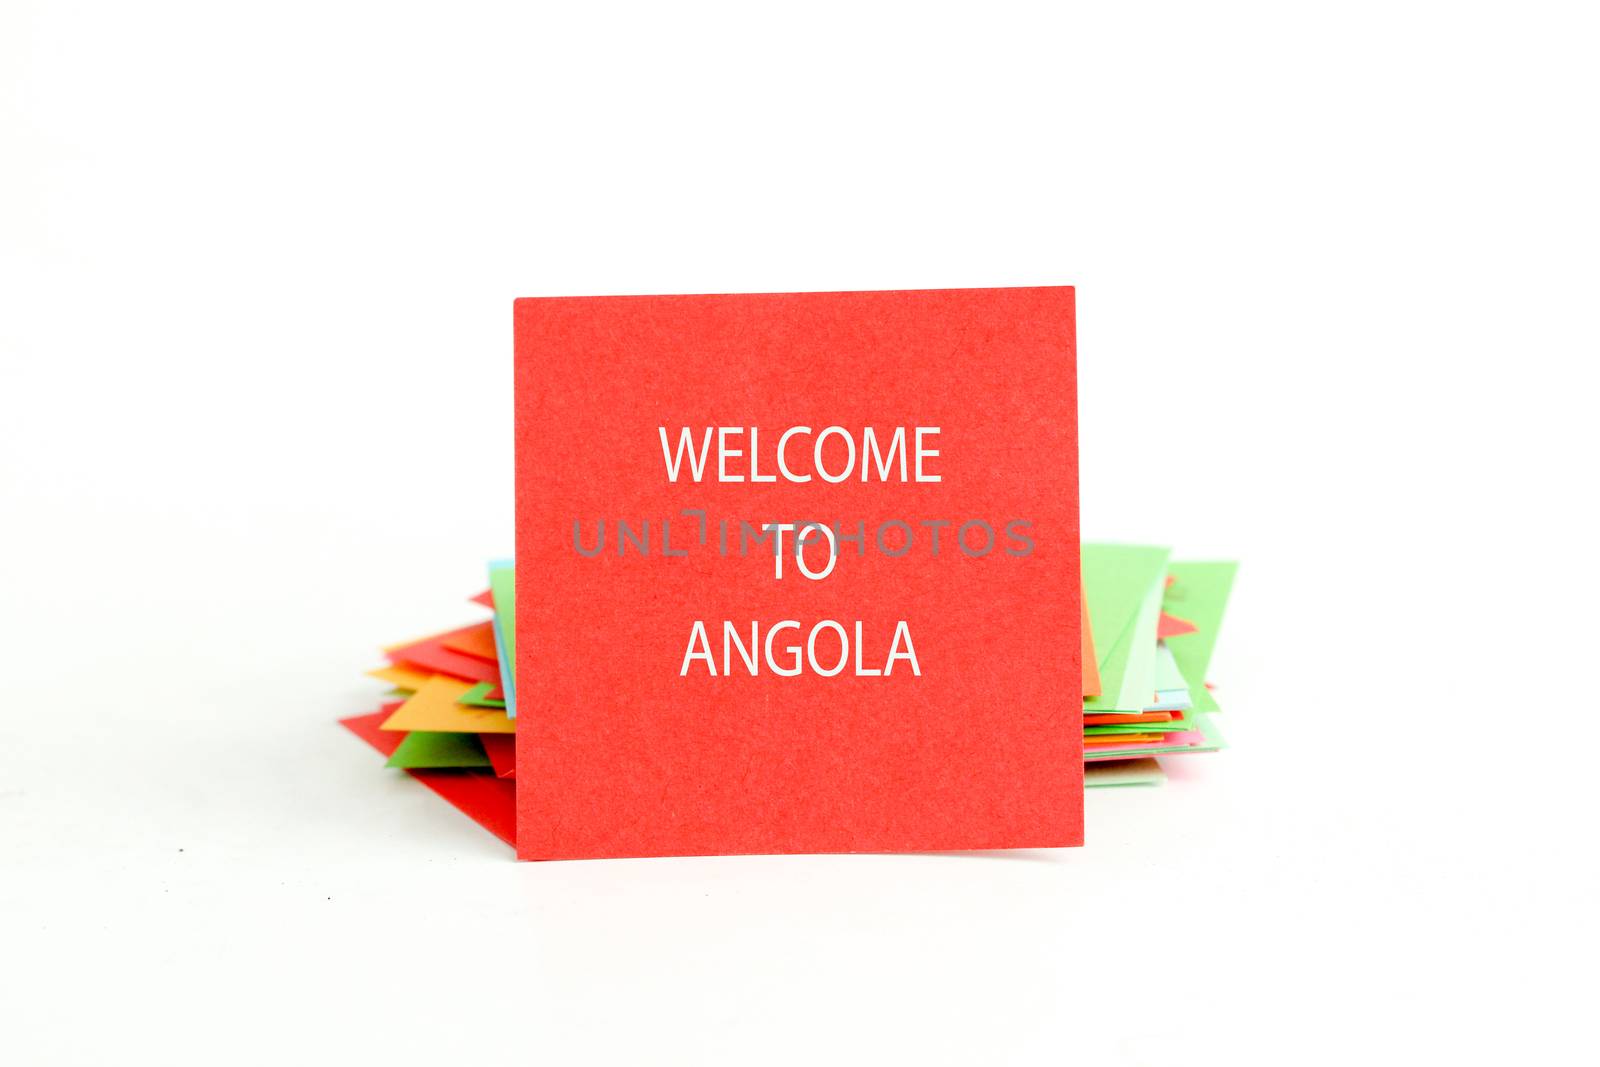 picture of a red note paper with text welcome to angola